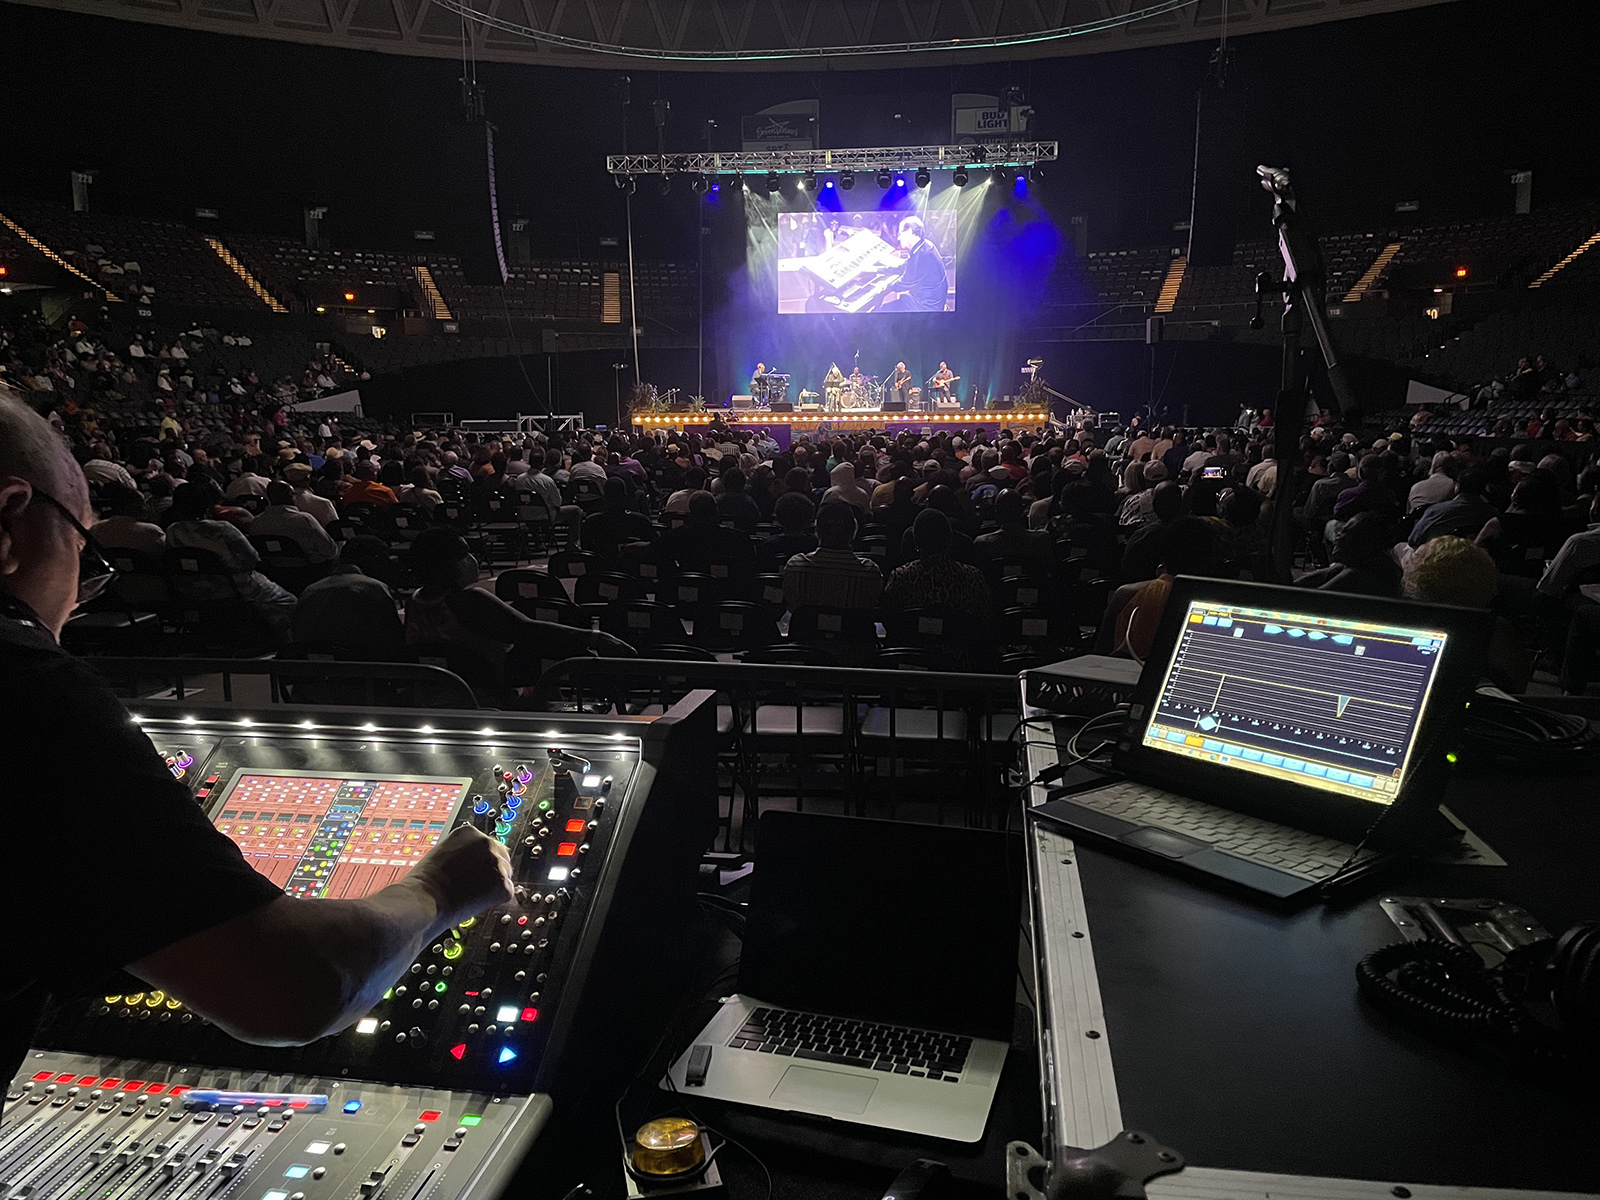 soundworks-double-up-on-martin-audio-wavefront-precision-as-bad-weather-drives-norfolk-jazz-festival-indoors-1.jpg